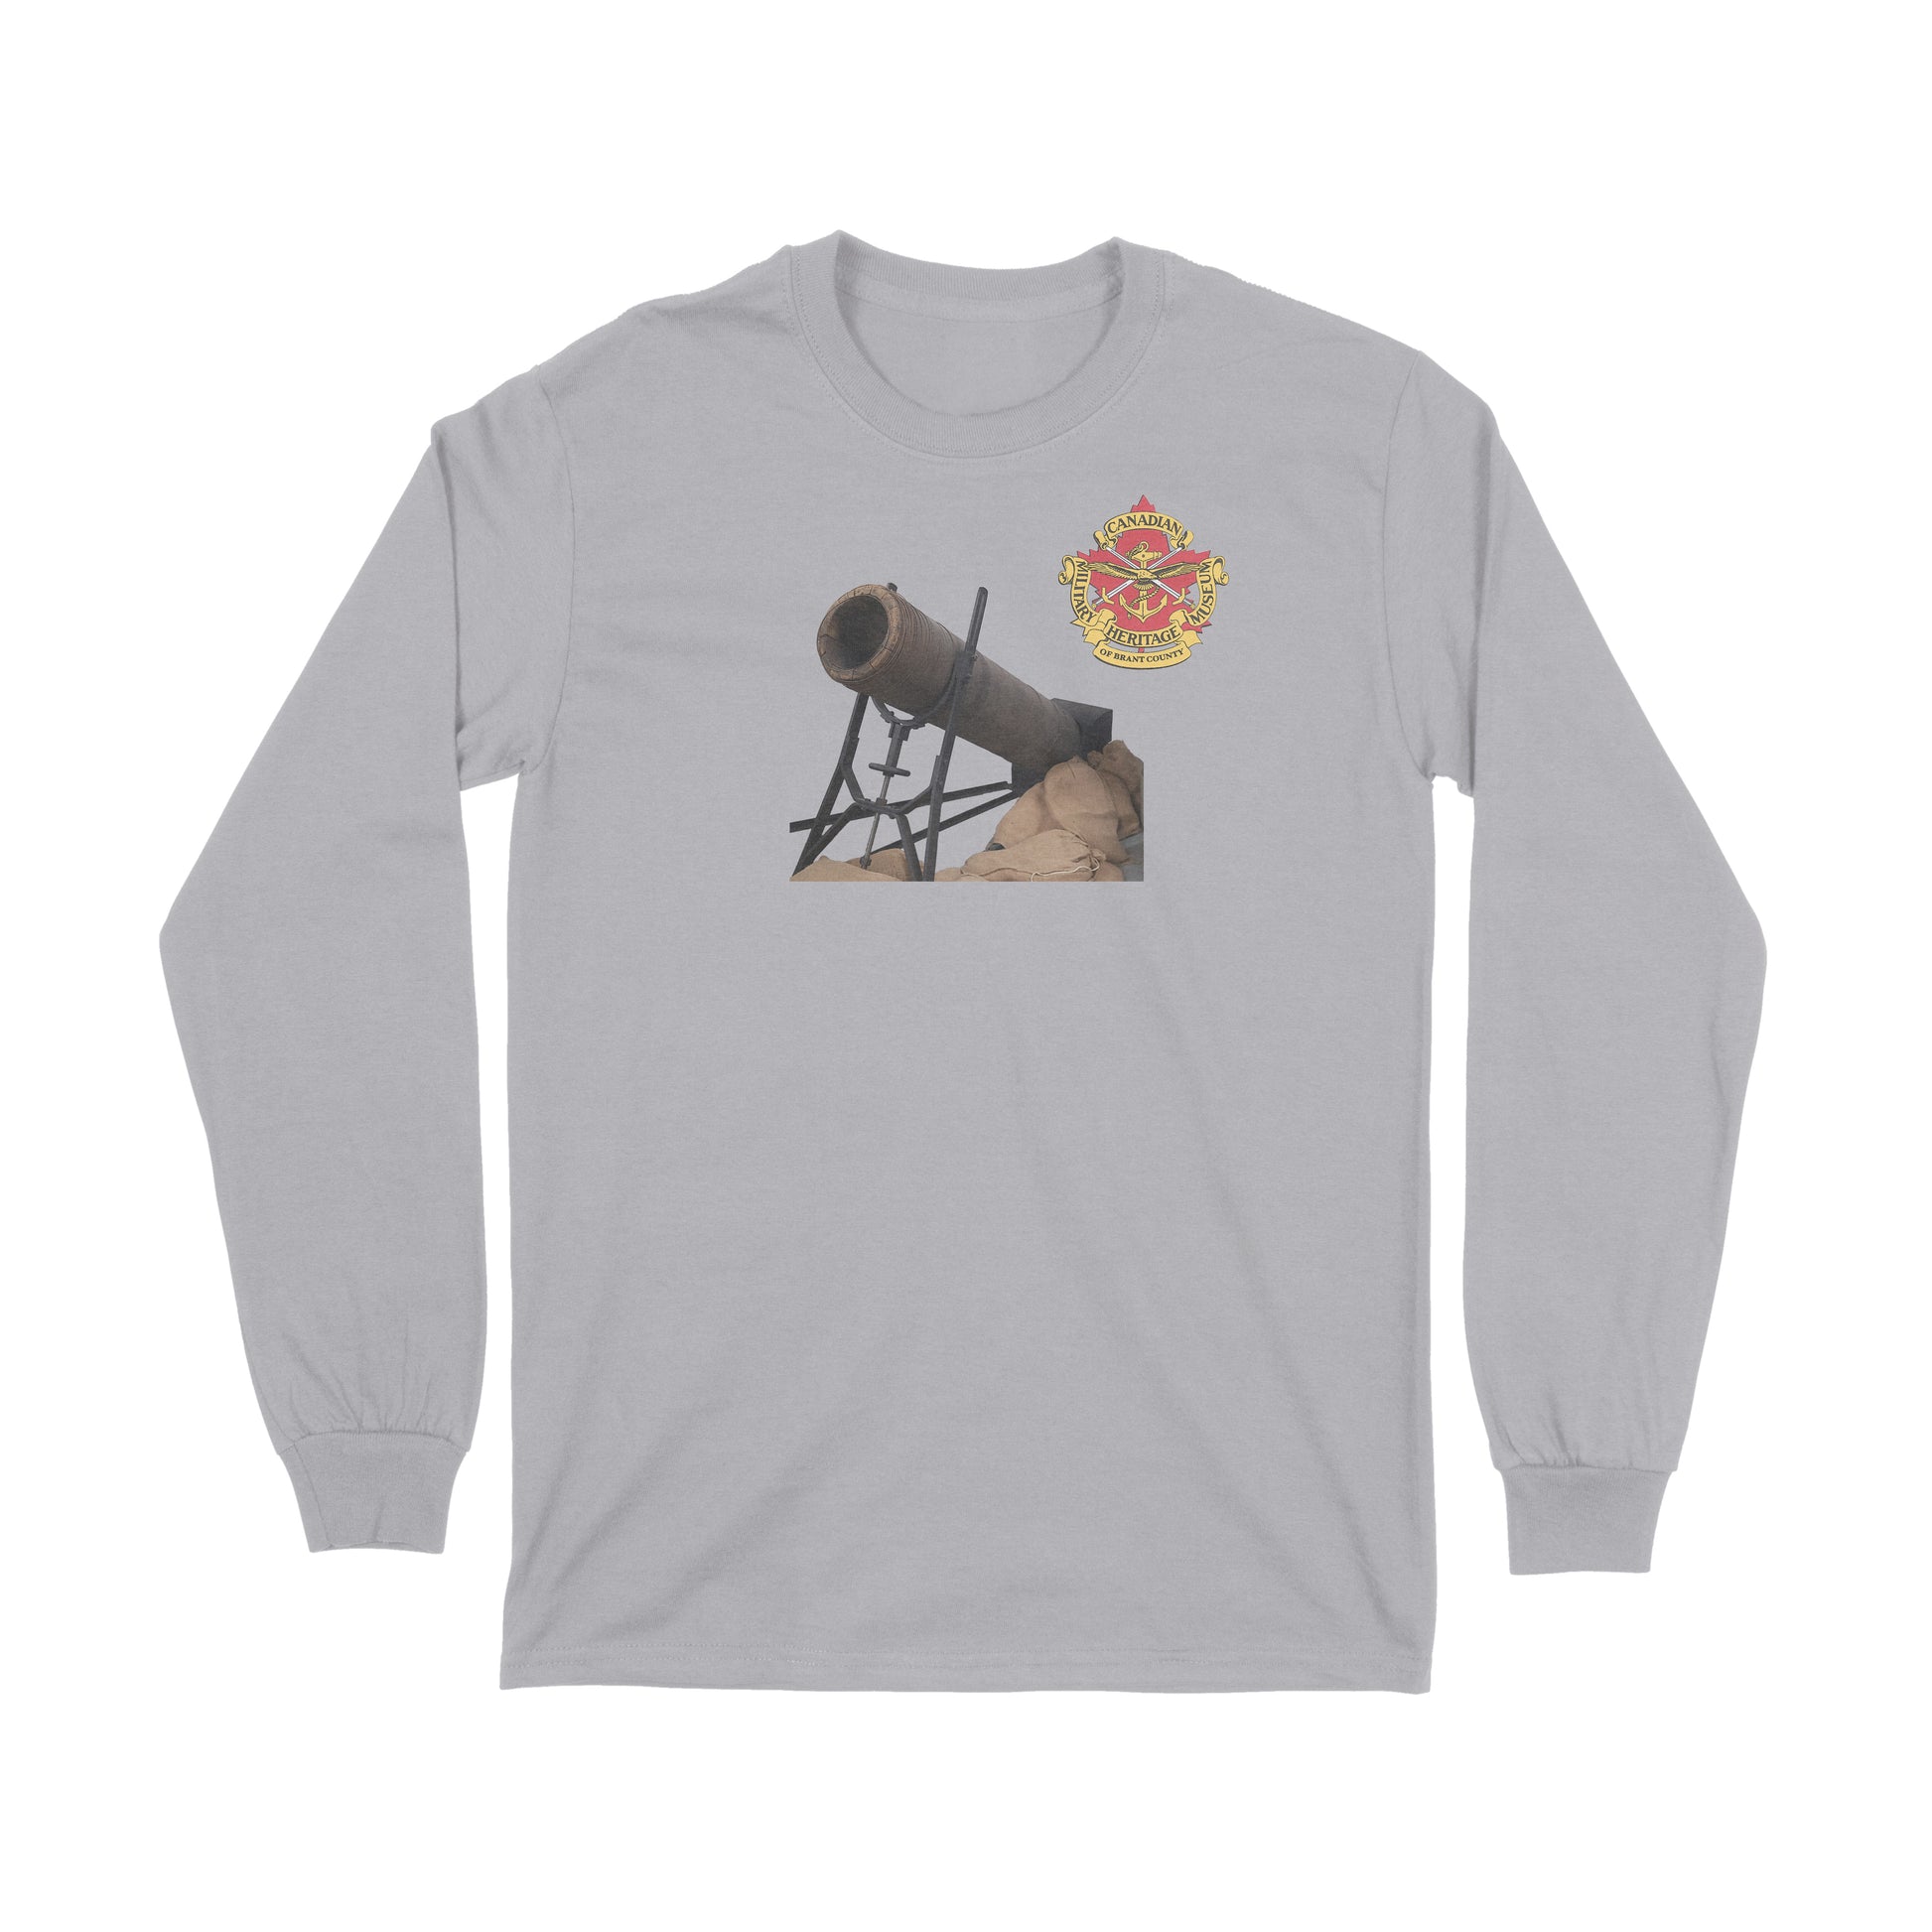 Albrecht Trench Mortar, Brantford, Canadian Military Heritage Museum, Fat Dave, Long Sleeve, Museum, Grey